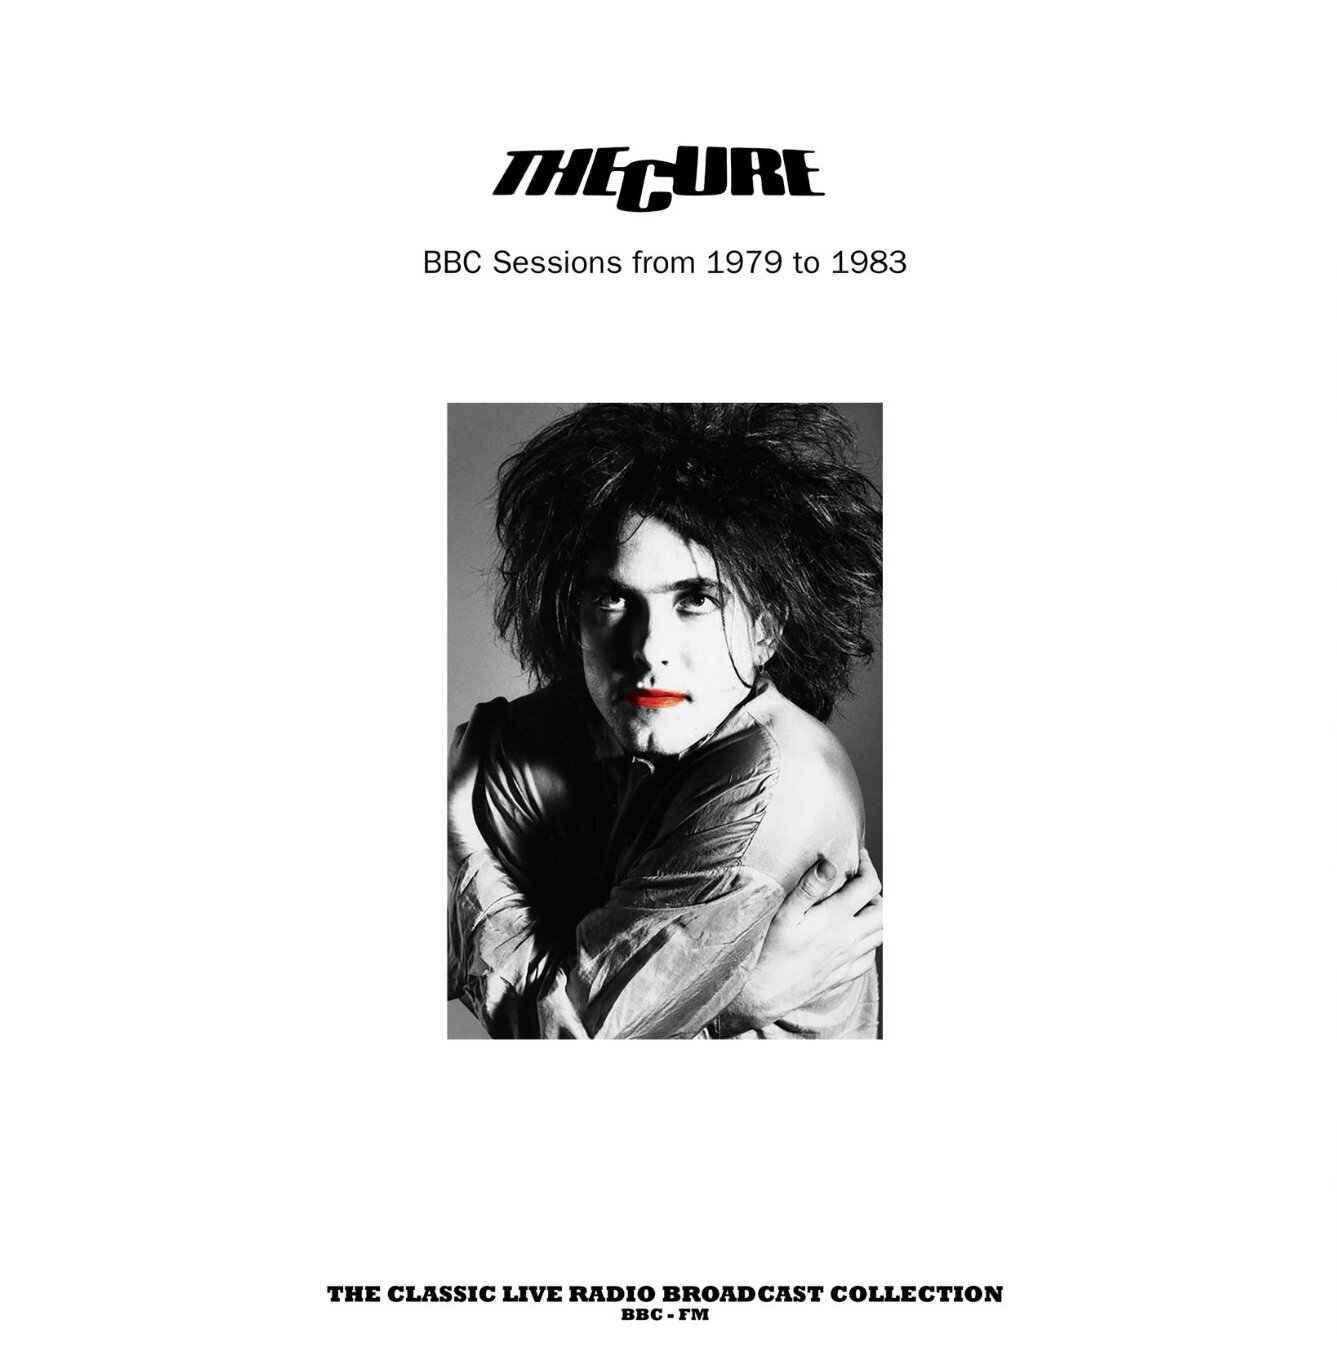 The Cure - BBC Sessions 1979-1983 (Red Coloured) (LP) The Cure